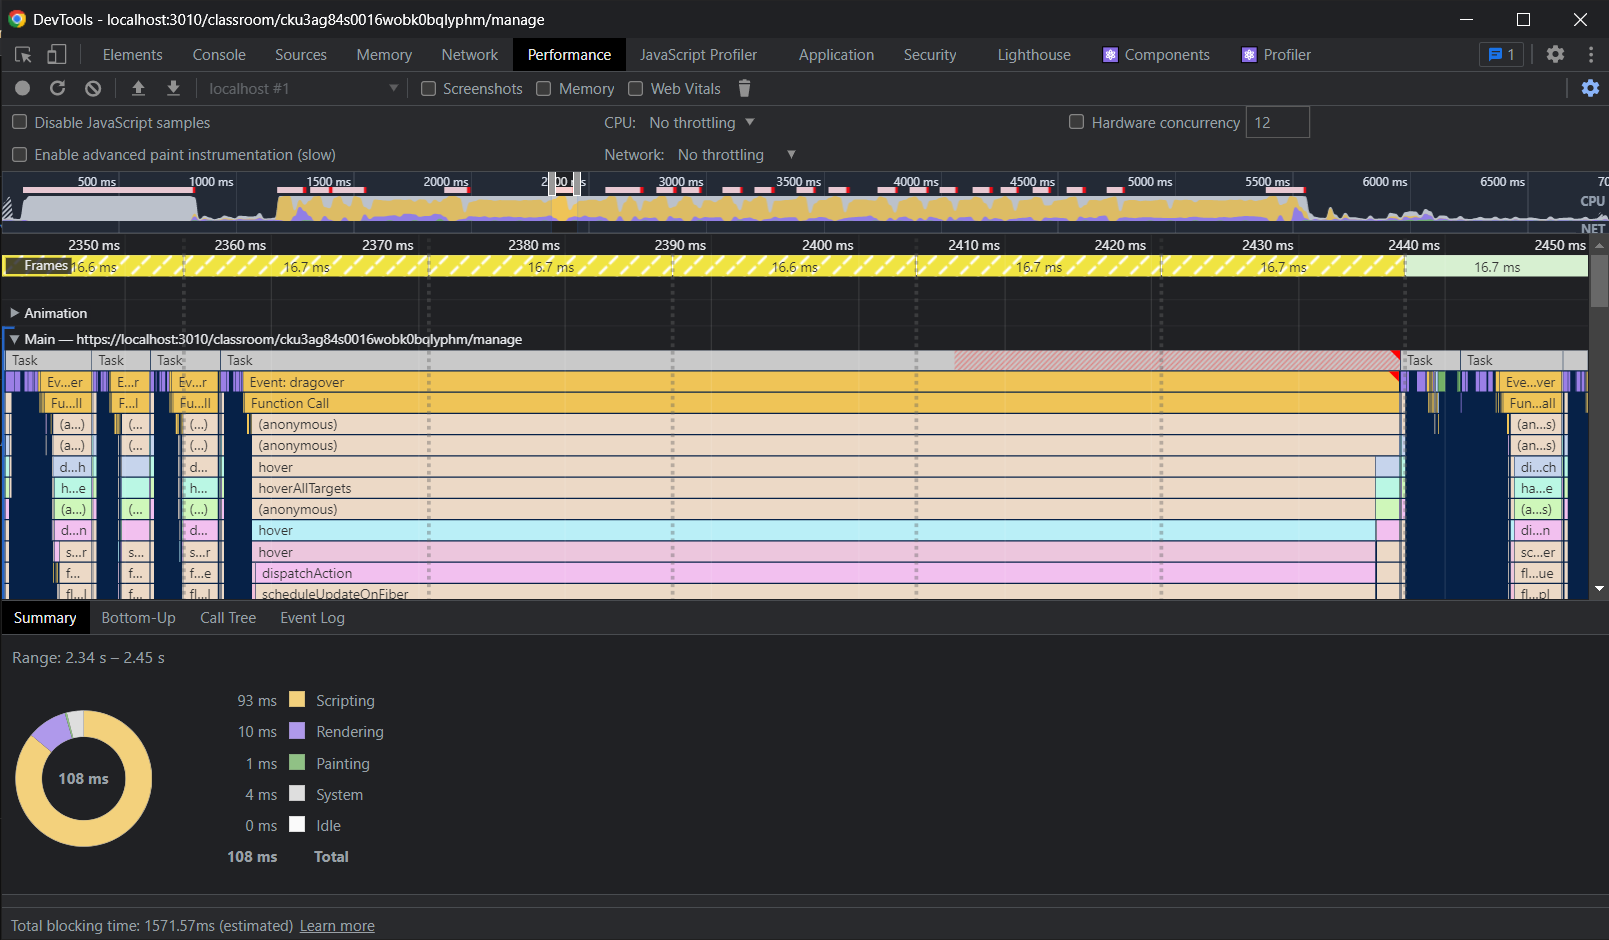 The Chrome developer tools profiling pane showing a flame graph and various statistics